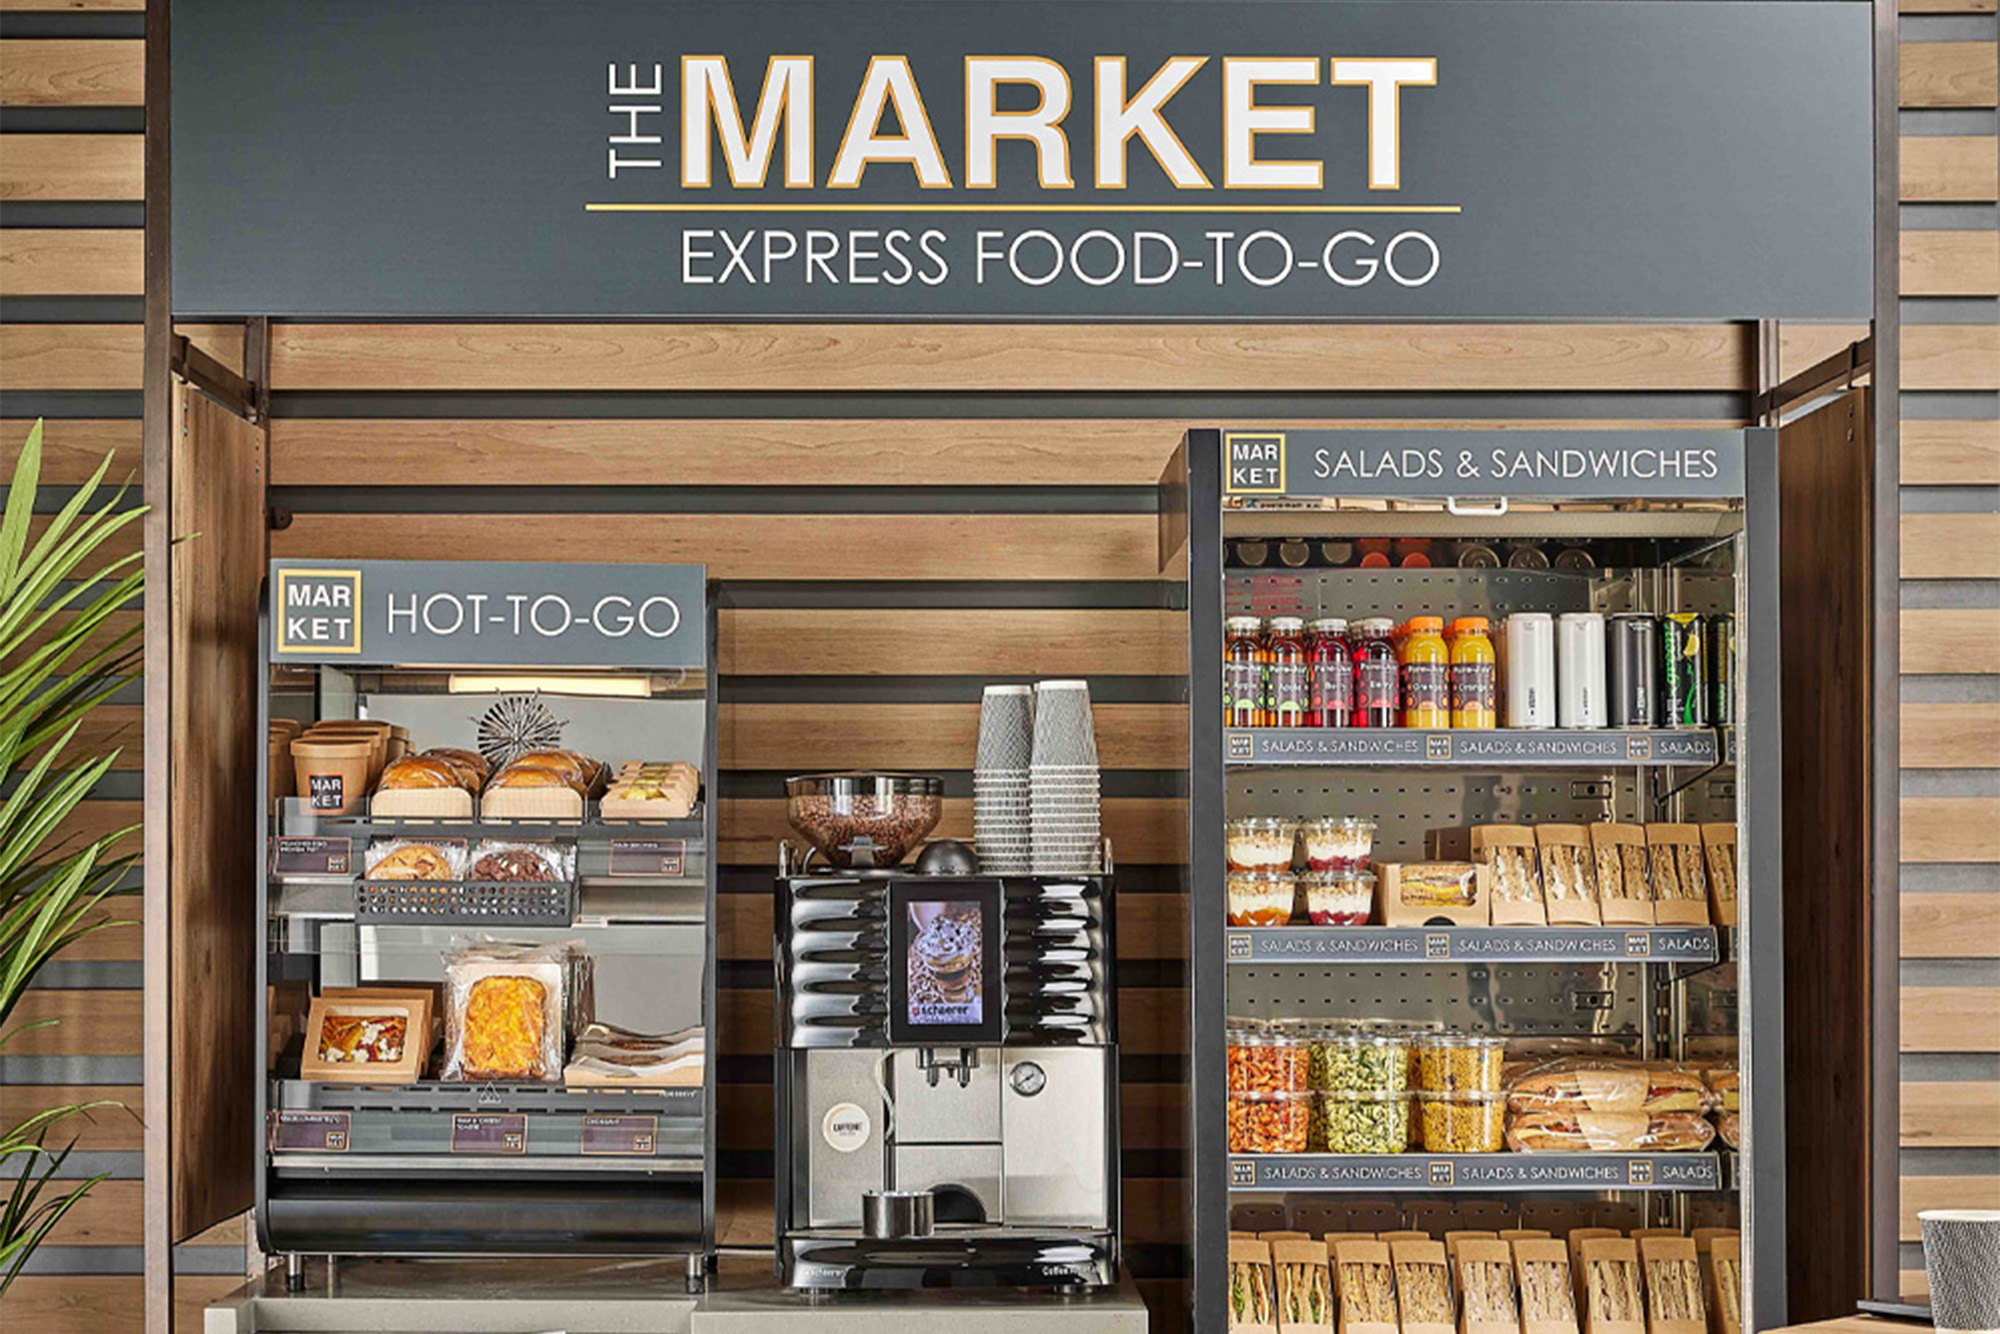 Self-service Micro Market featuring Flexeserve Zone Countertop unit with a range of hot grab and go